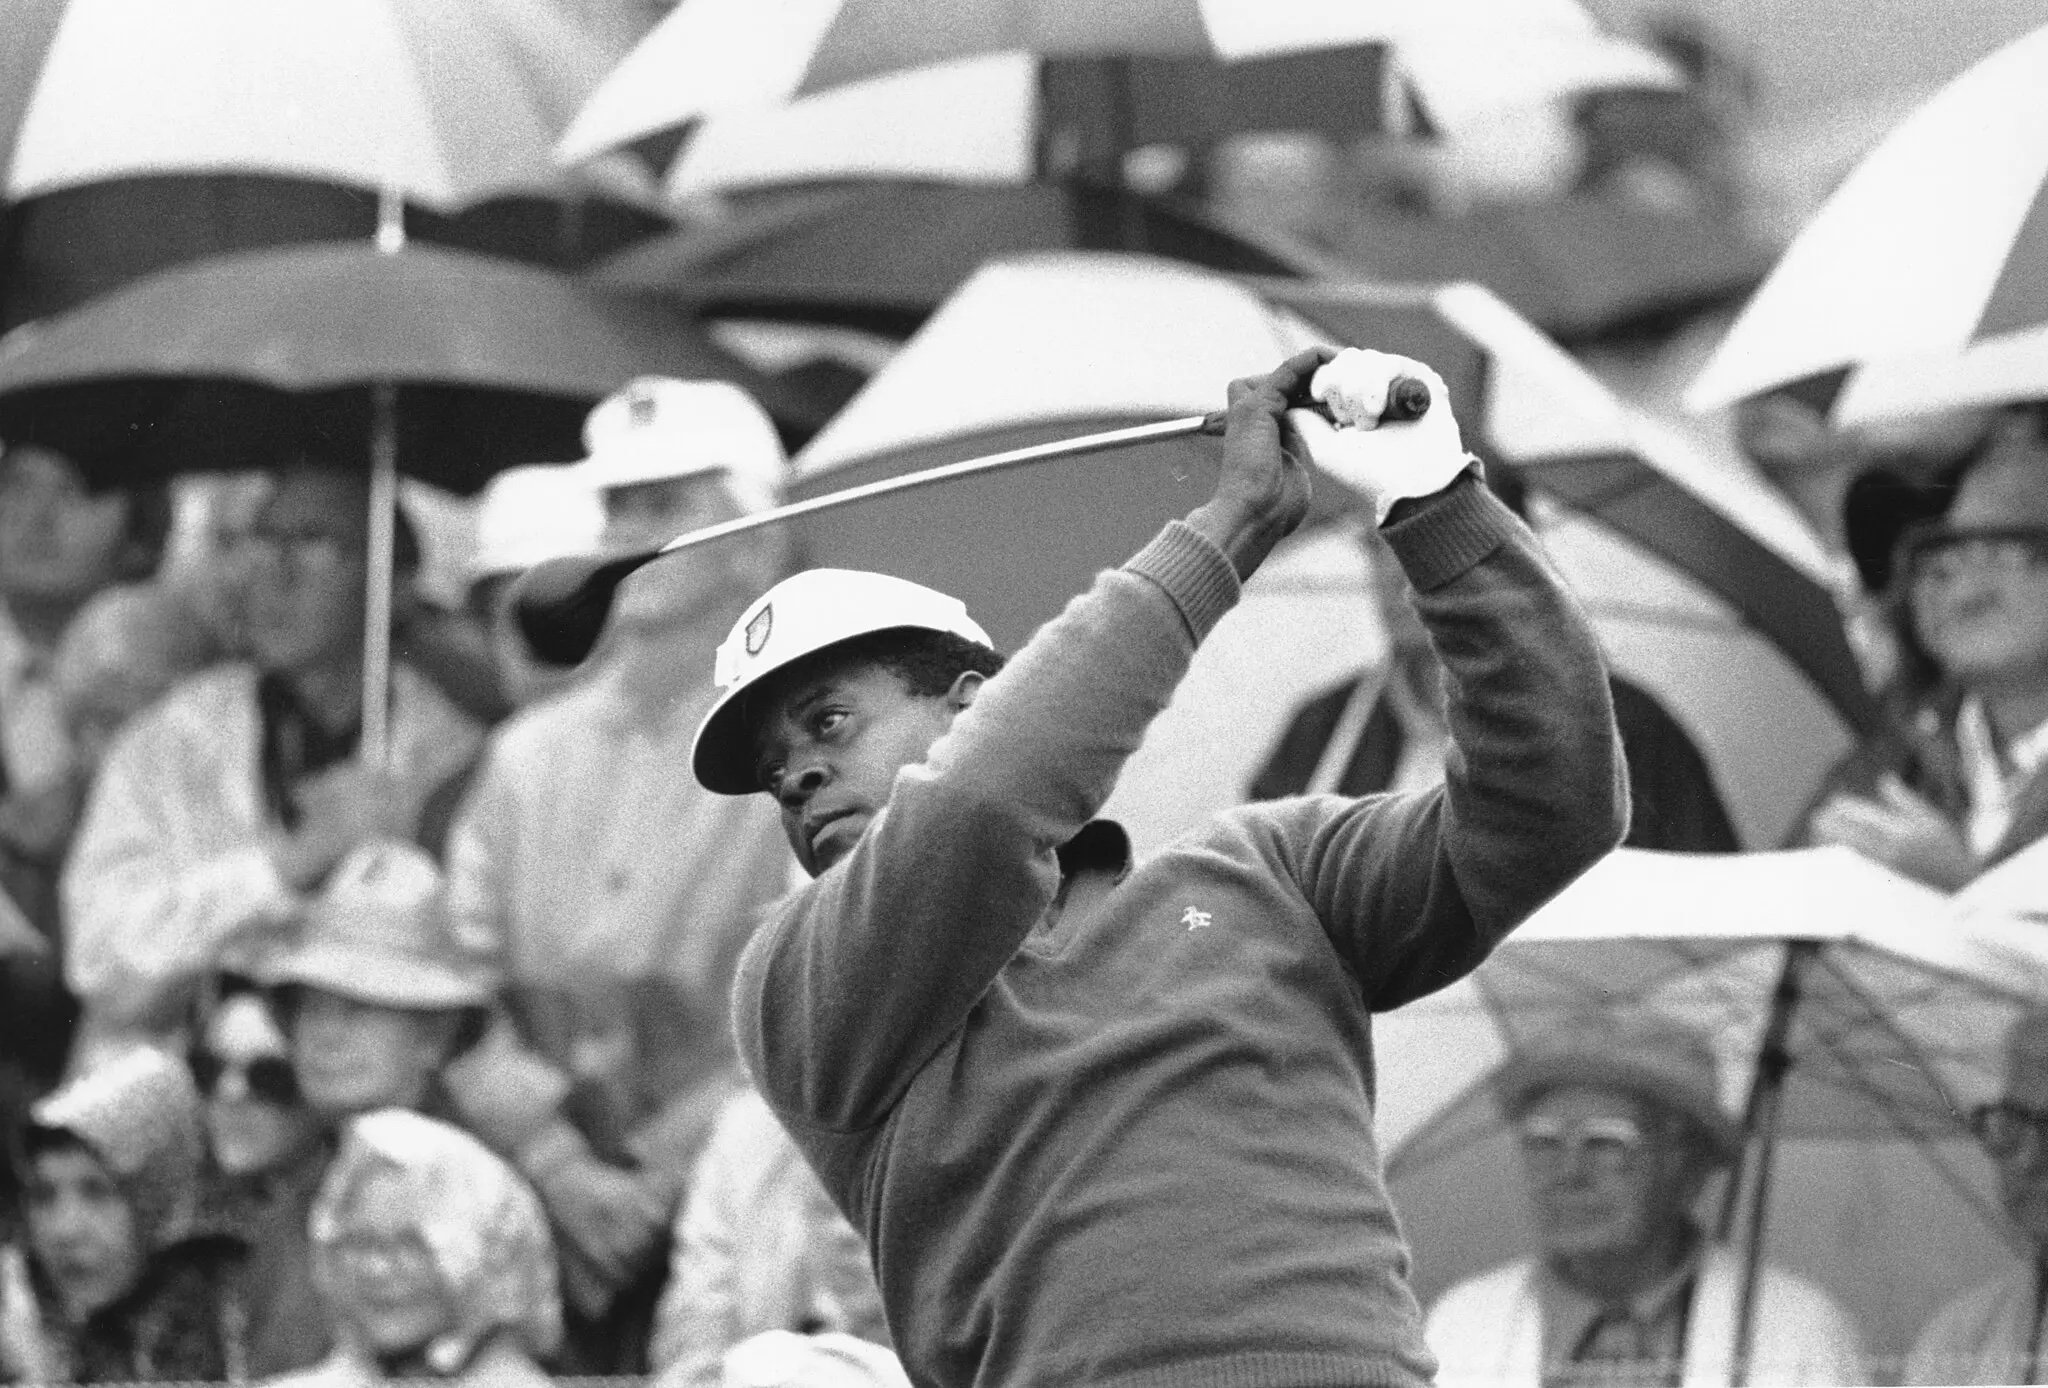 Elder at the 1975 Masters